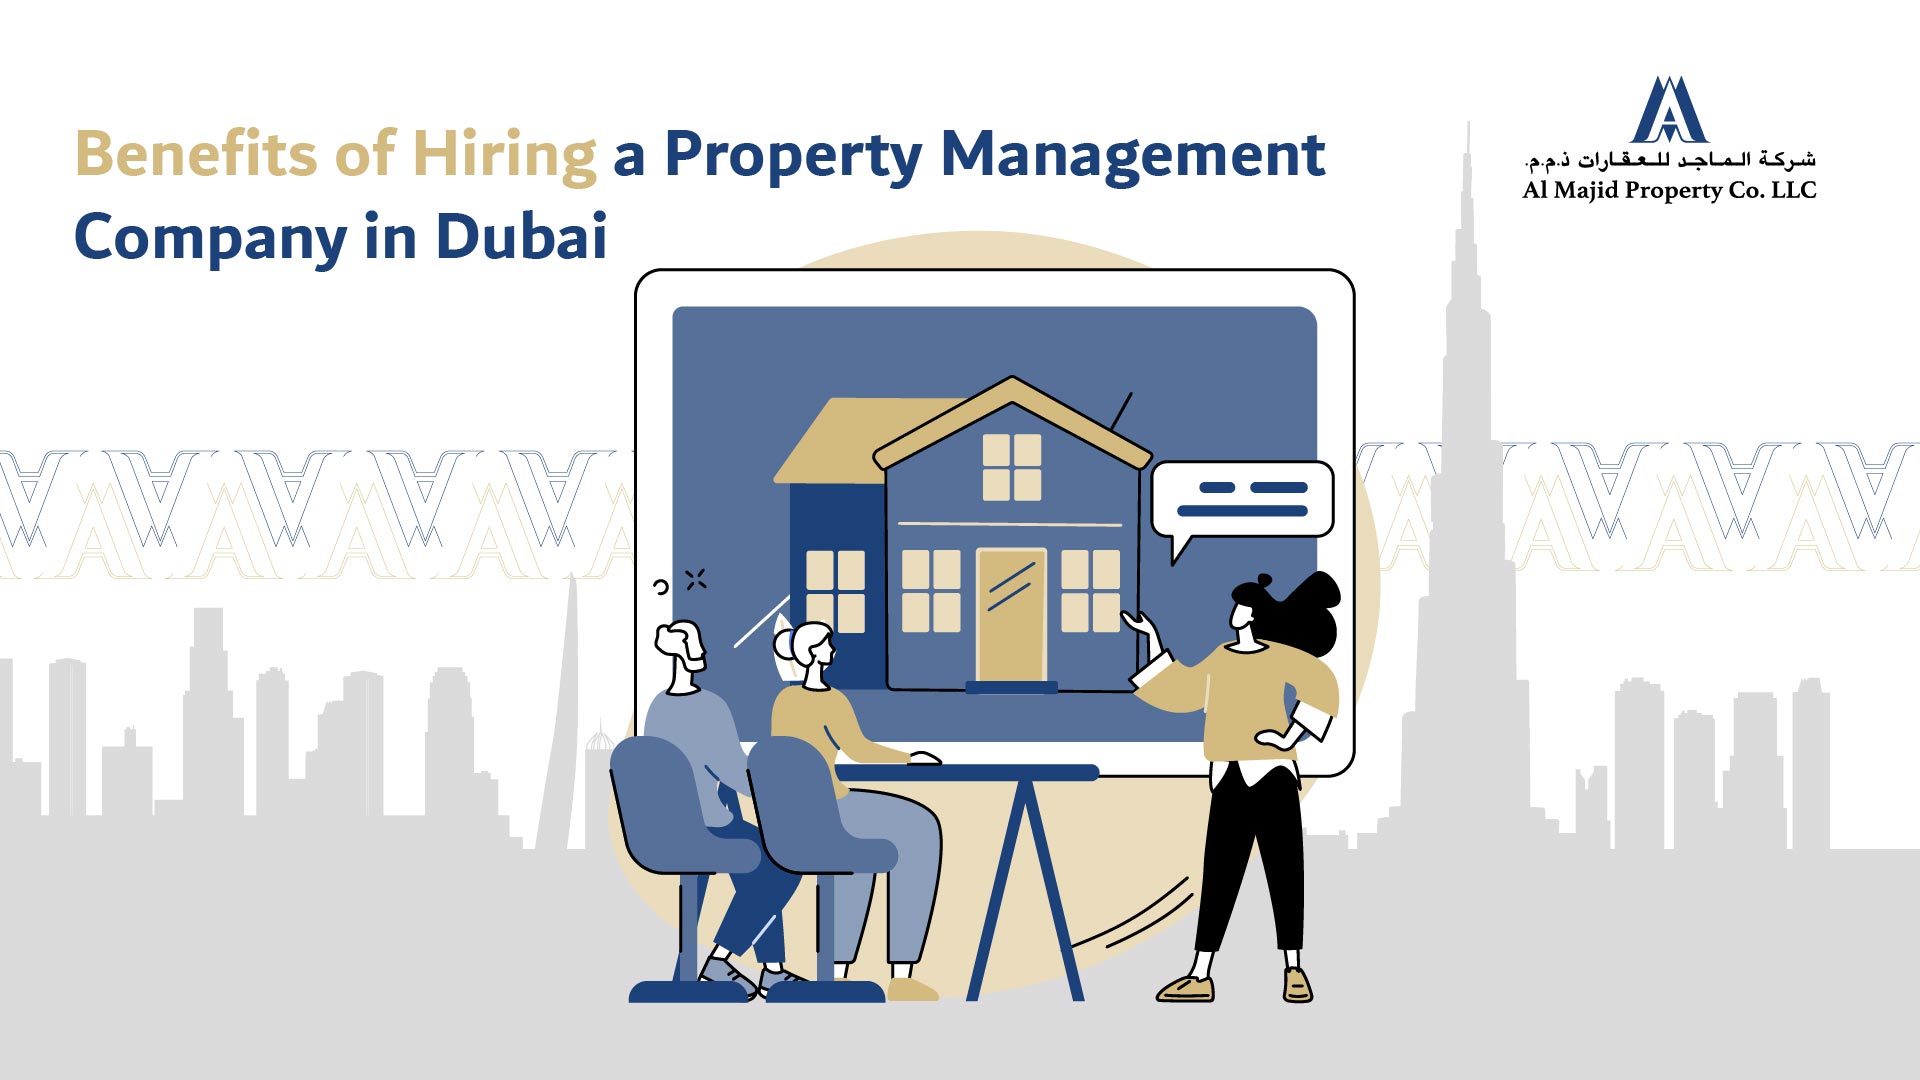 Benefits of Hiring a Property Management Company in Dubai